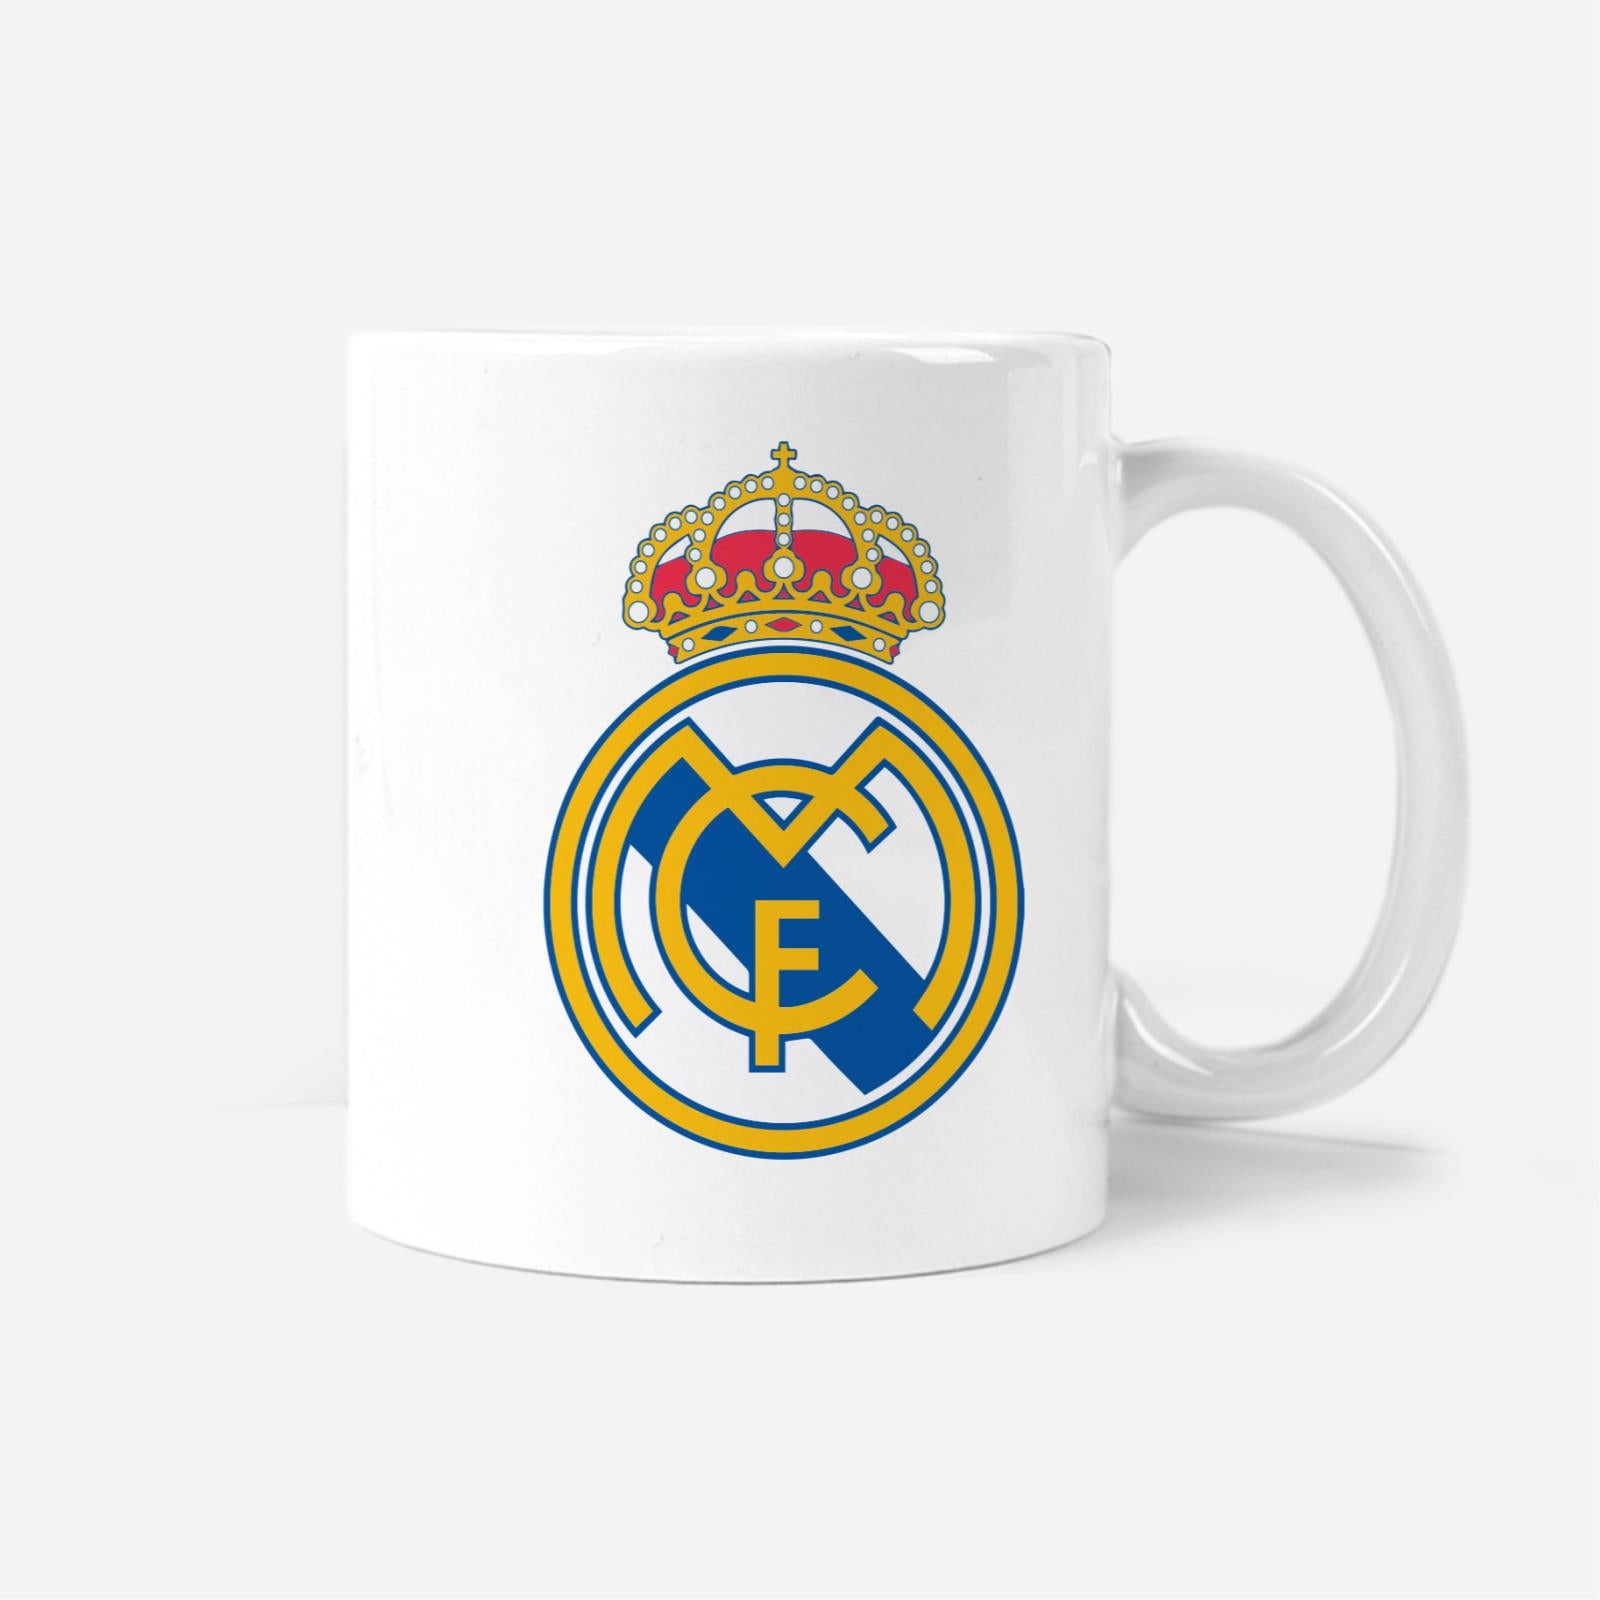 Real Madrid Football Fan Mug Personalizable with Name and Number